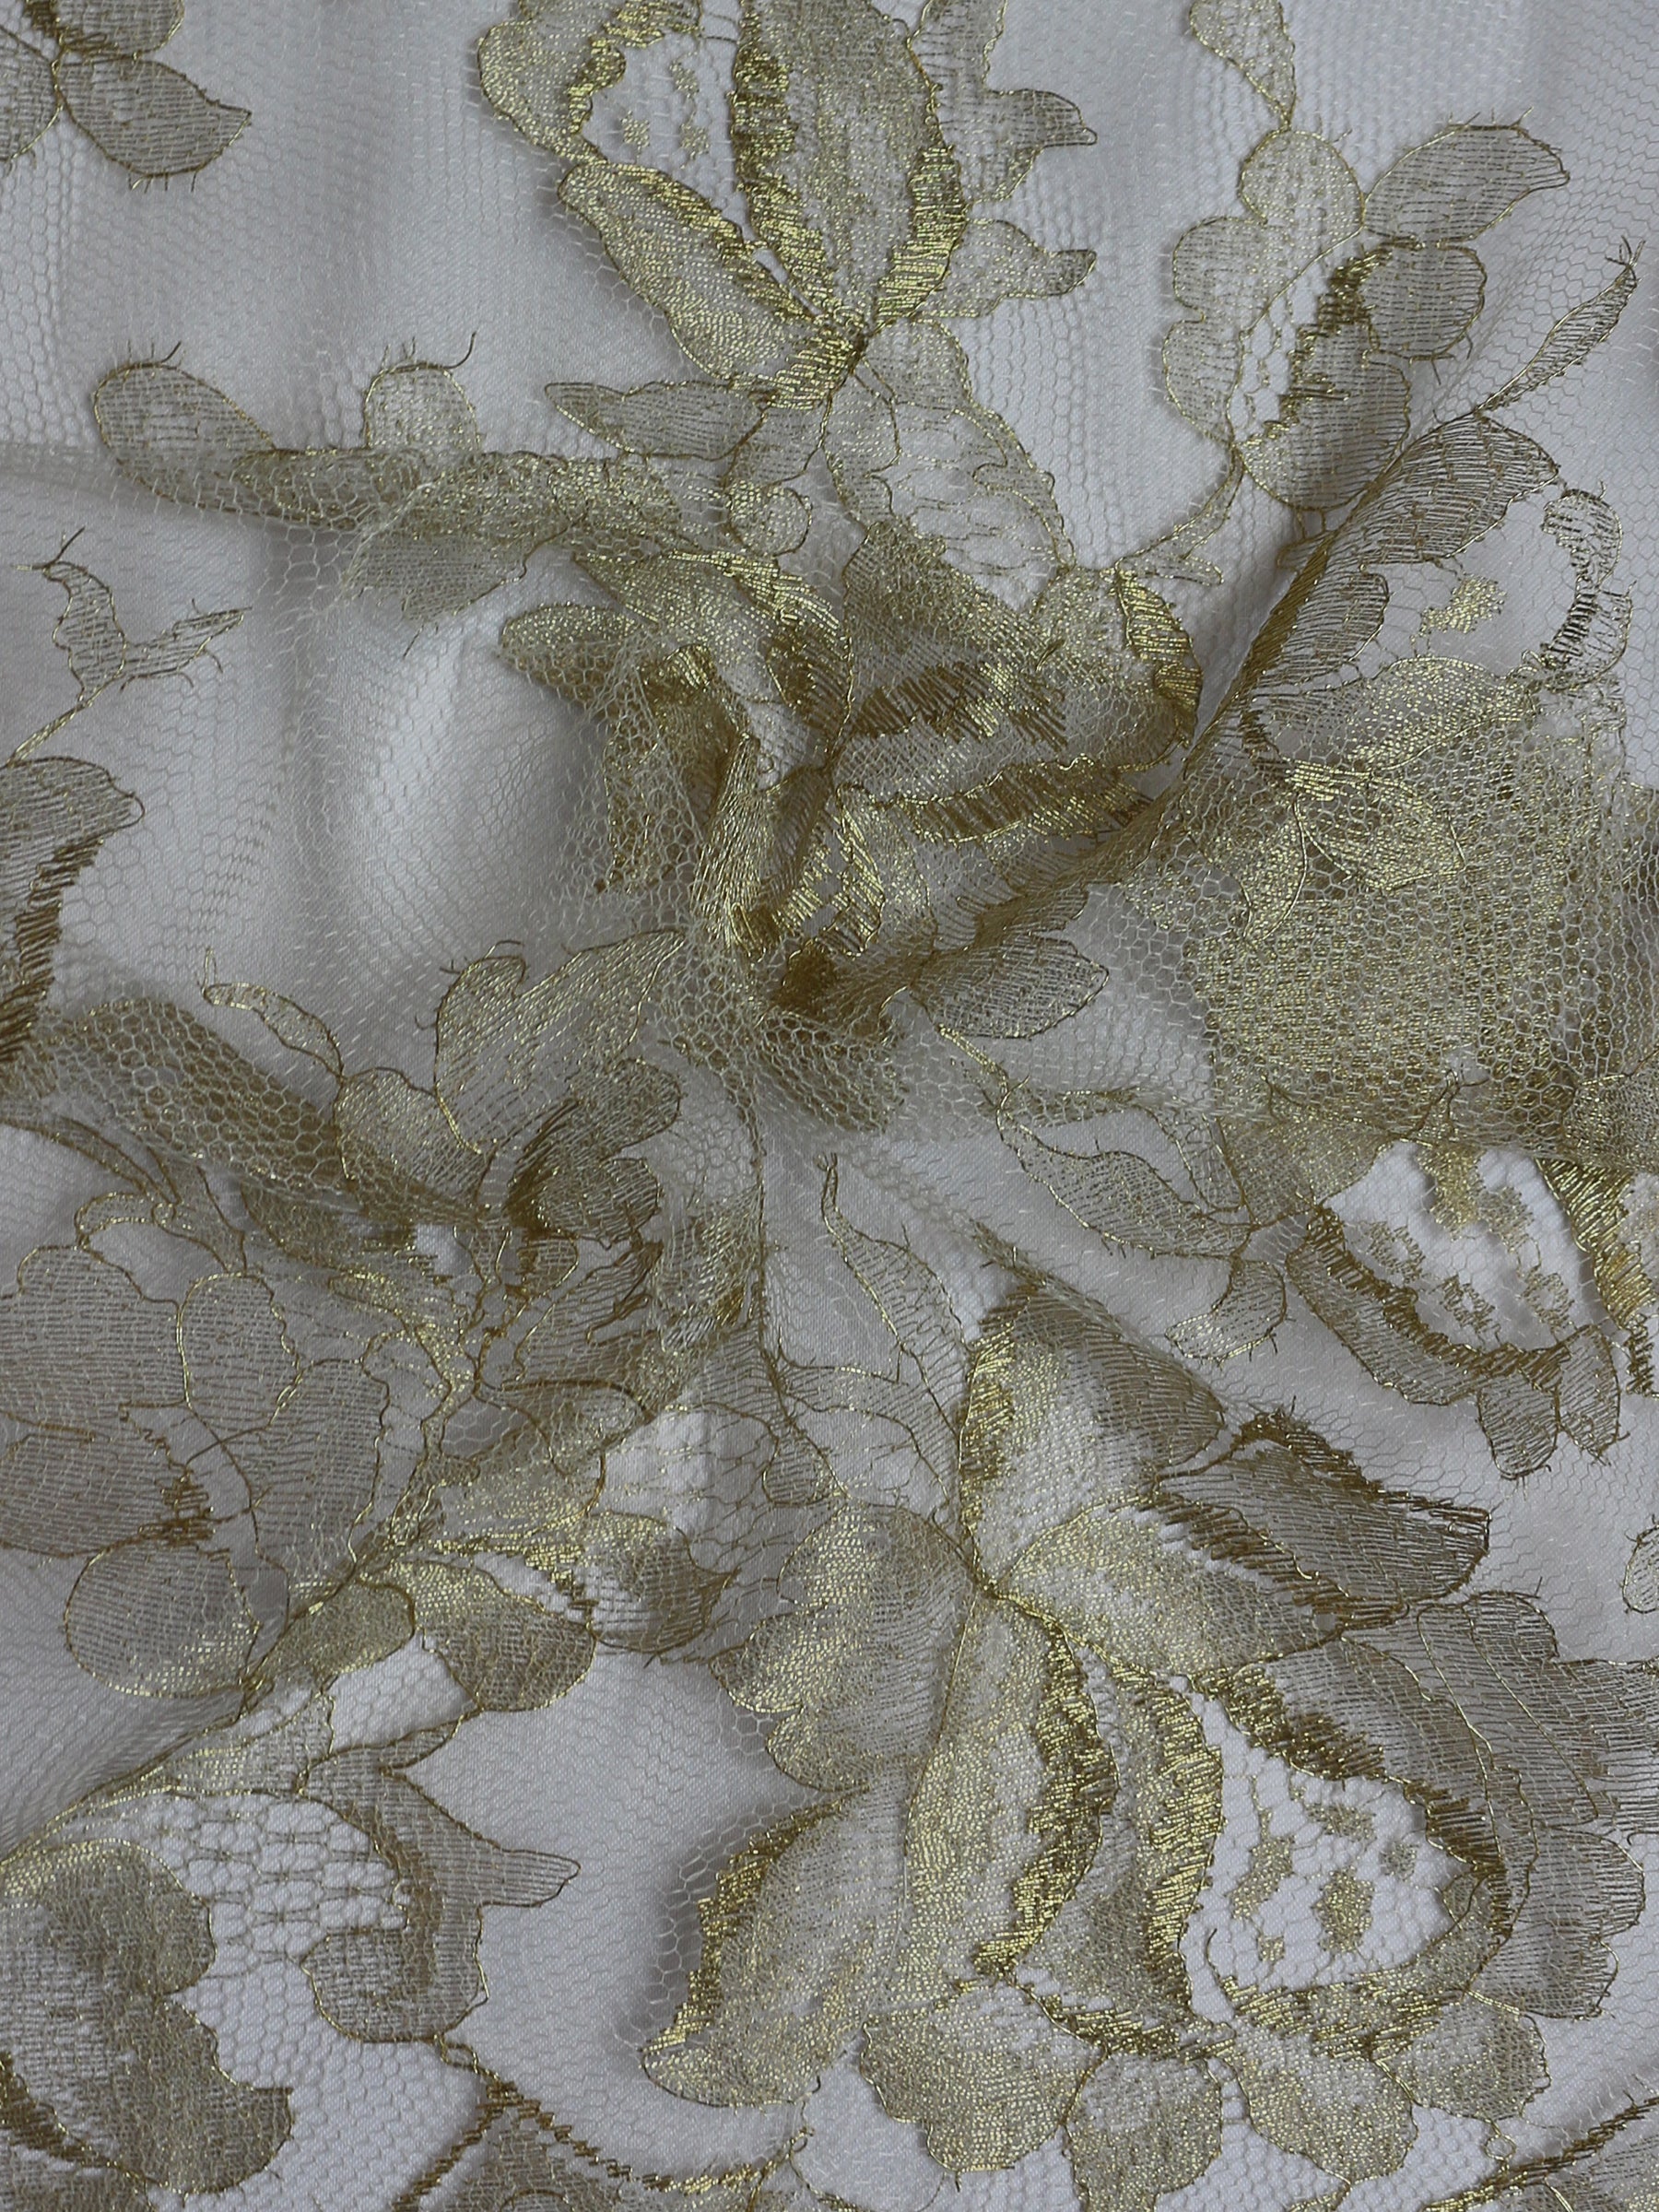 Ivory 70% polyester 30% cotton chantilly lace fabric - Chantilly